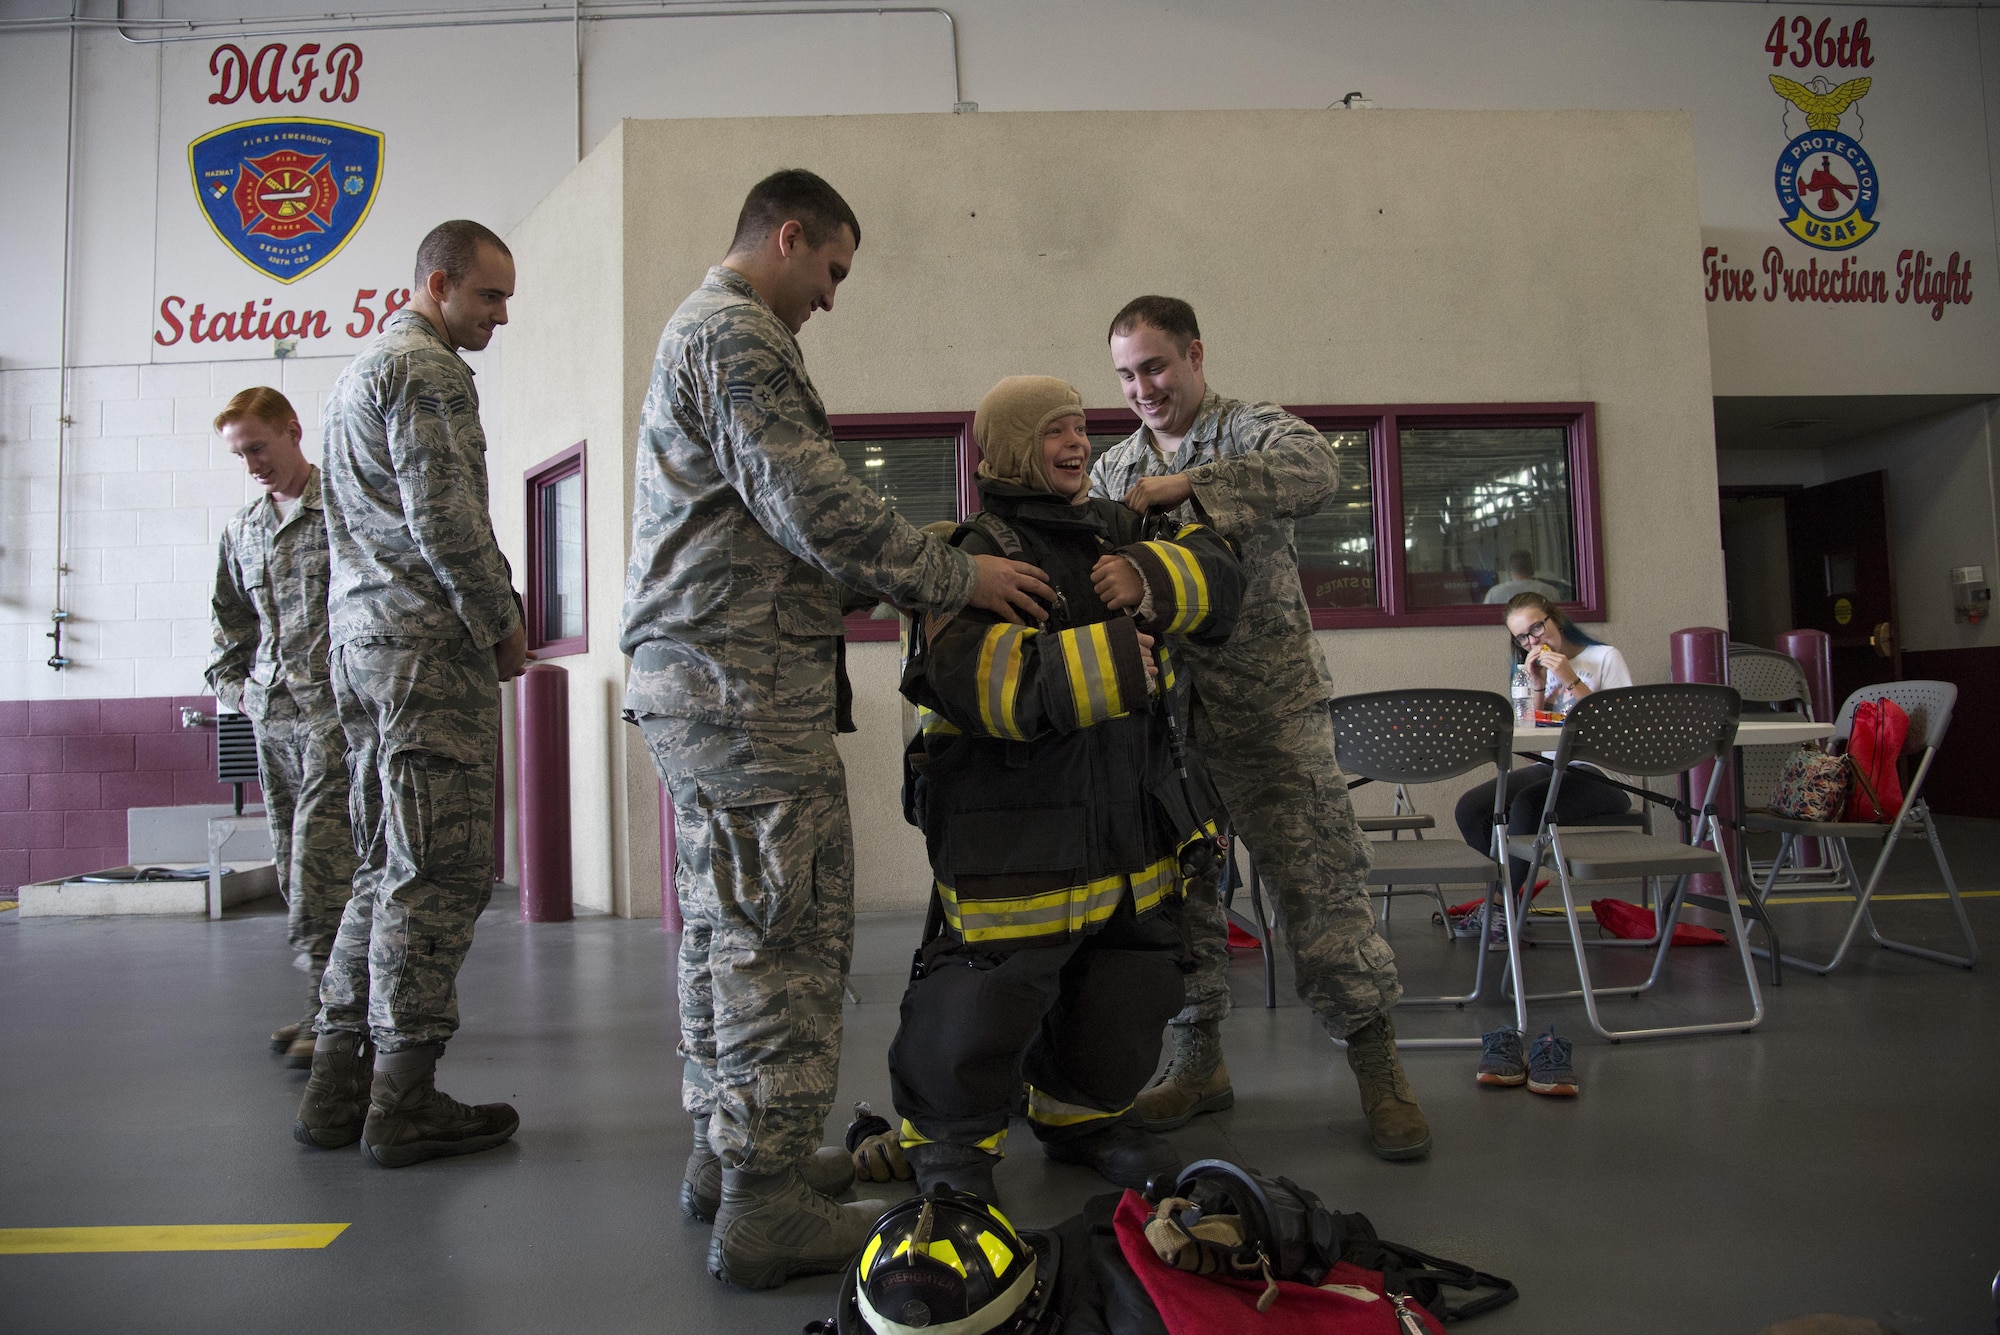 Senior Airmen James Marker and Jamie Perigny, 436th Civil Engineer Squadron firefighters, help Merric Hunt, son of Master Sgt. Adam Hunt, 436th Maintenance Squadron Isochronal Maintenance Dock chief, try on firefighting bunker gear during the Dover Air Force Base First Responders’ Special Needs Day Oct. 8, 2016, at the 436th CES Fire Department on Dover AFB, Del. Event attendees had the opportunity to try on equipment, tour emergency response vehicles and learn something new about first responders. (U.S. Air Force photo by Senior Airman Aaron J. Jenne)